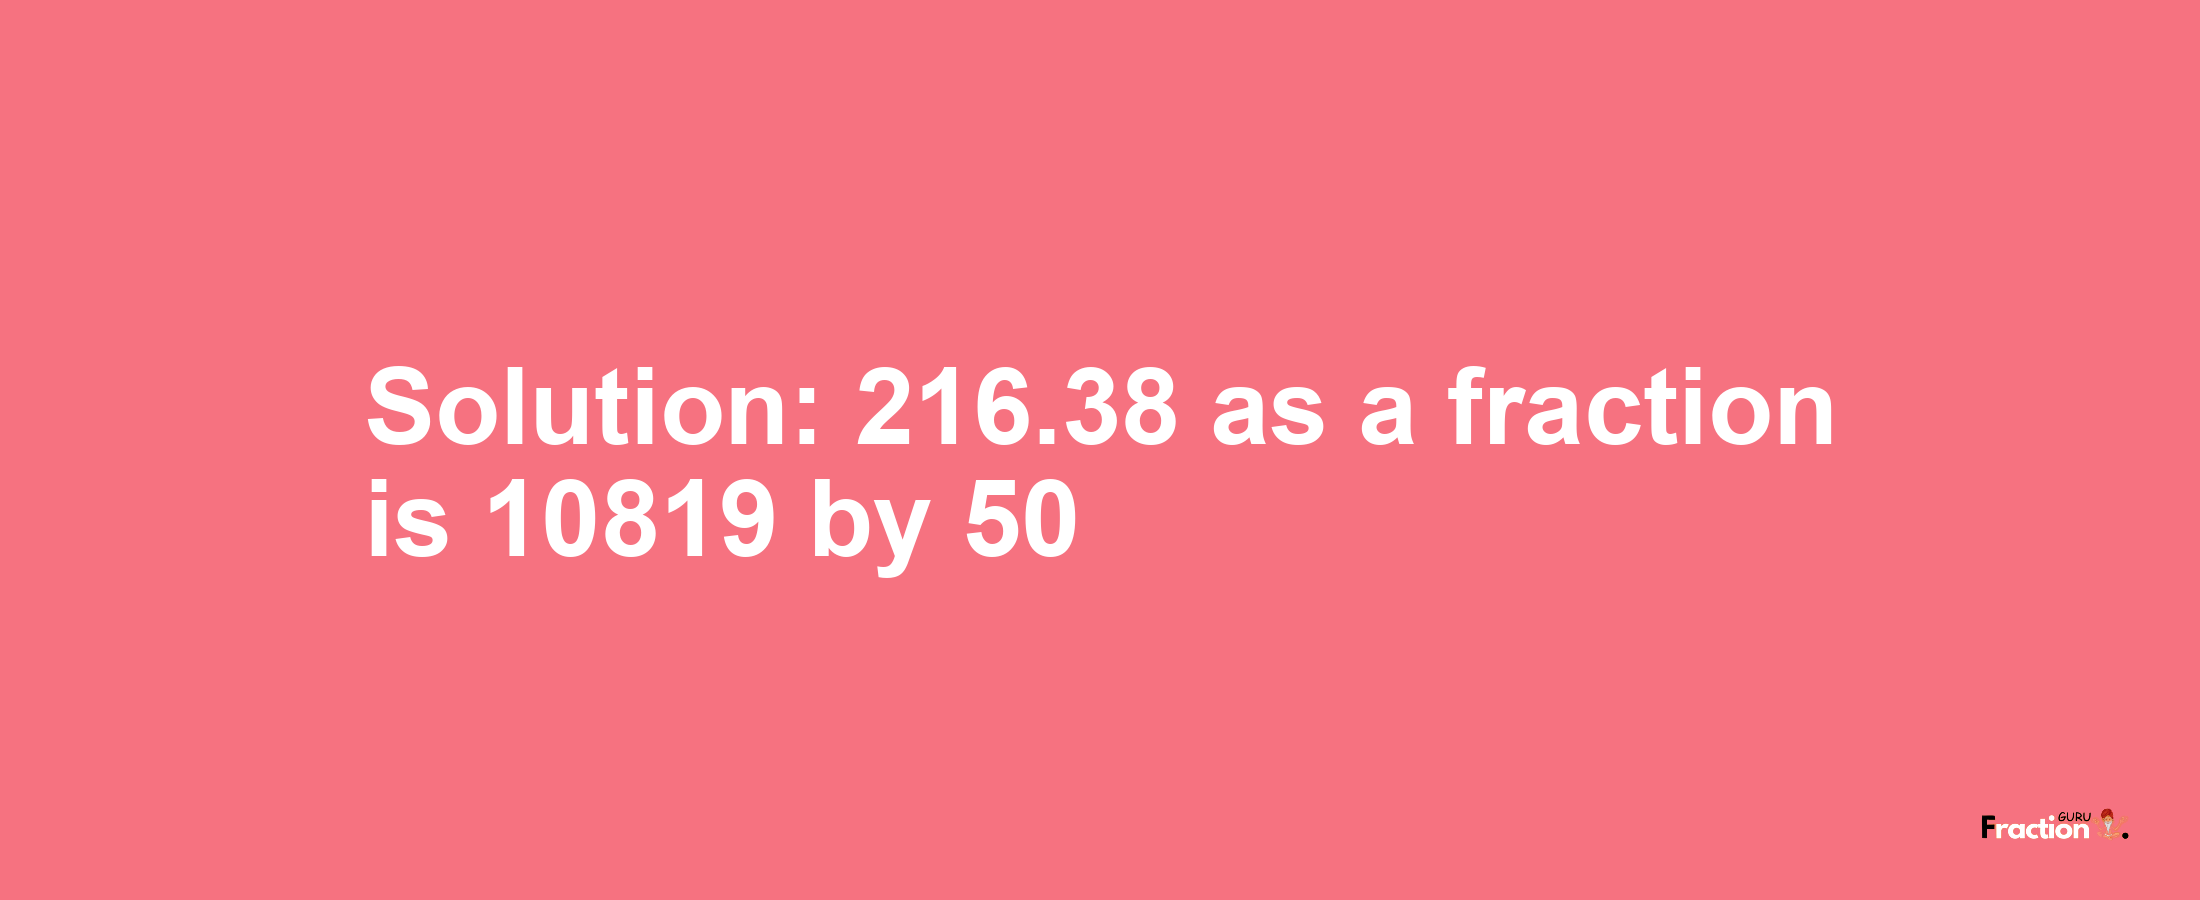 Solution:216.38 as a fraction is 10819/50